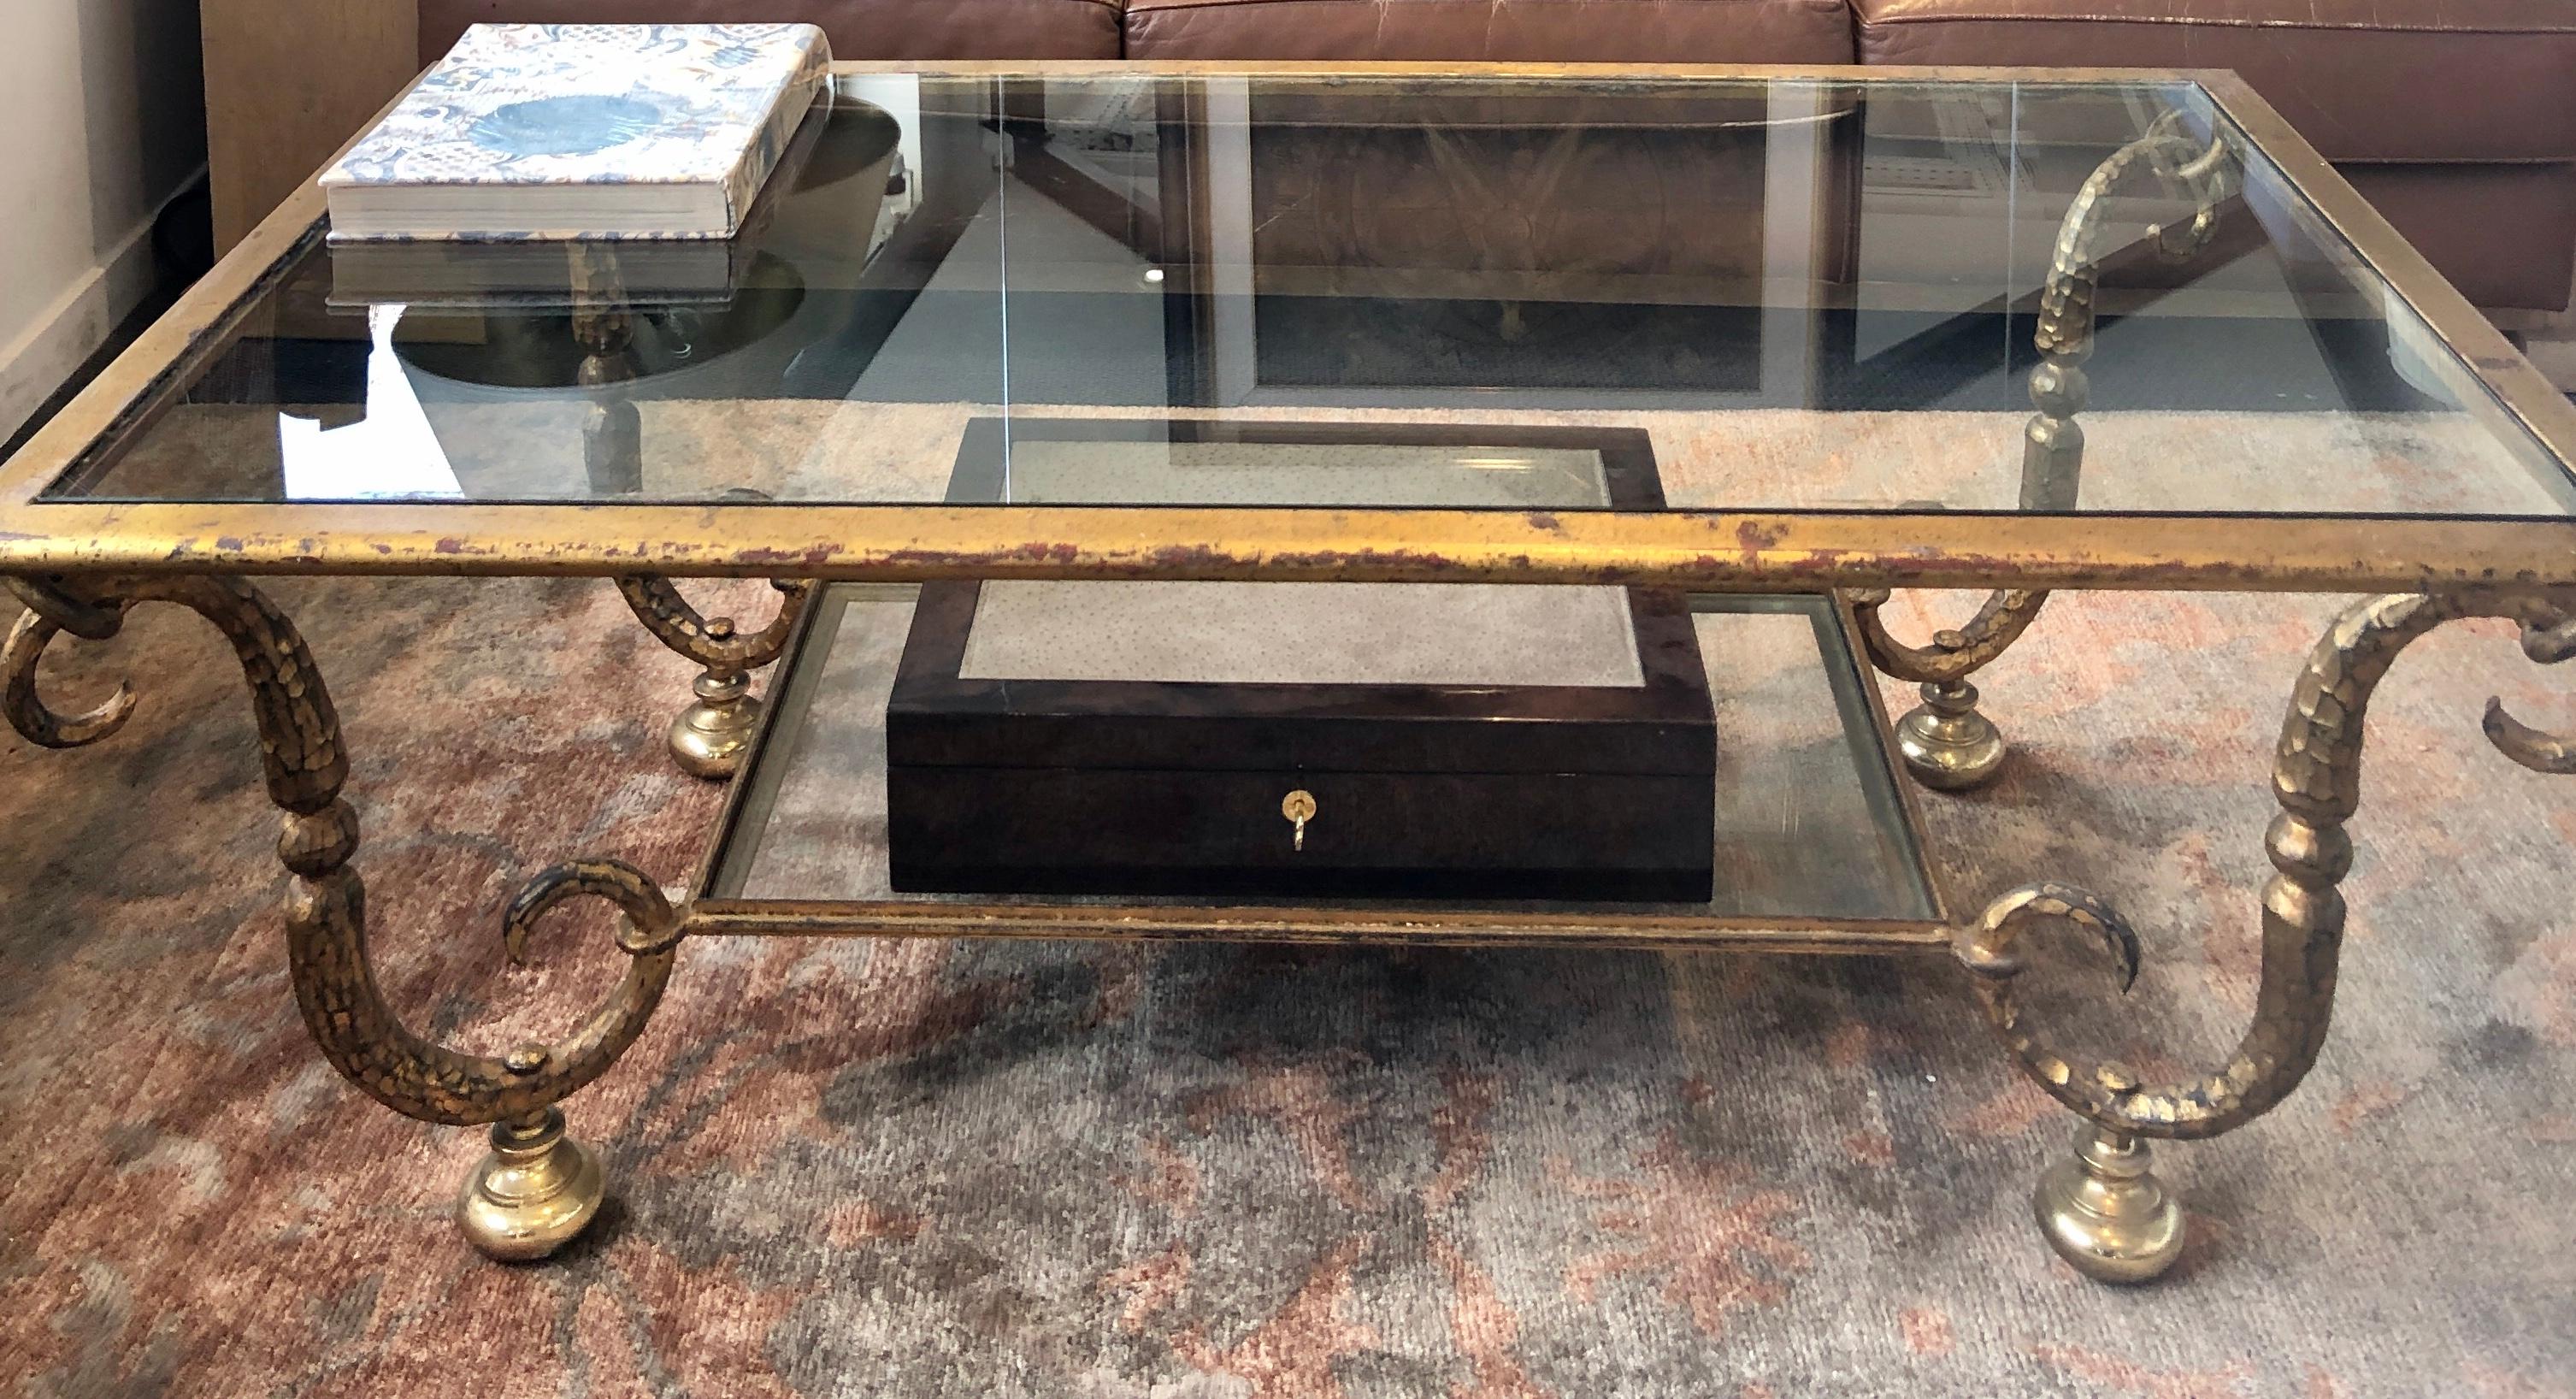 Rectangular coffee double tray coffee table from the French Maison Ramsey with hammered forged iron structure, scroll-shaped legs patinated with gold leaf finishing,
The top glass is thick and the end of the legs are placed on a solid brass